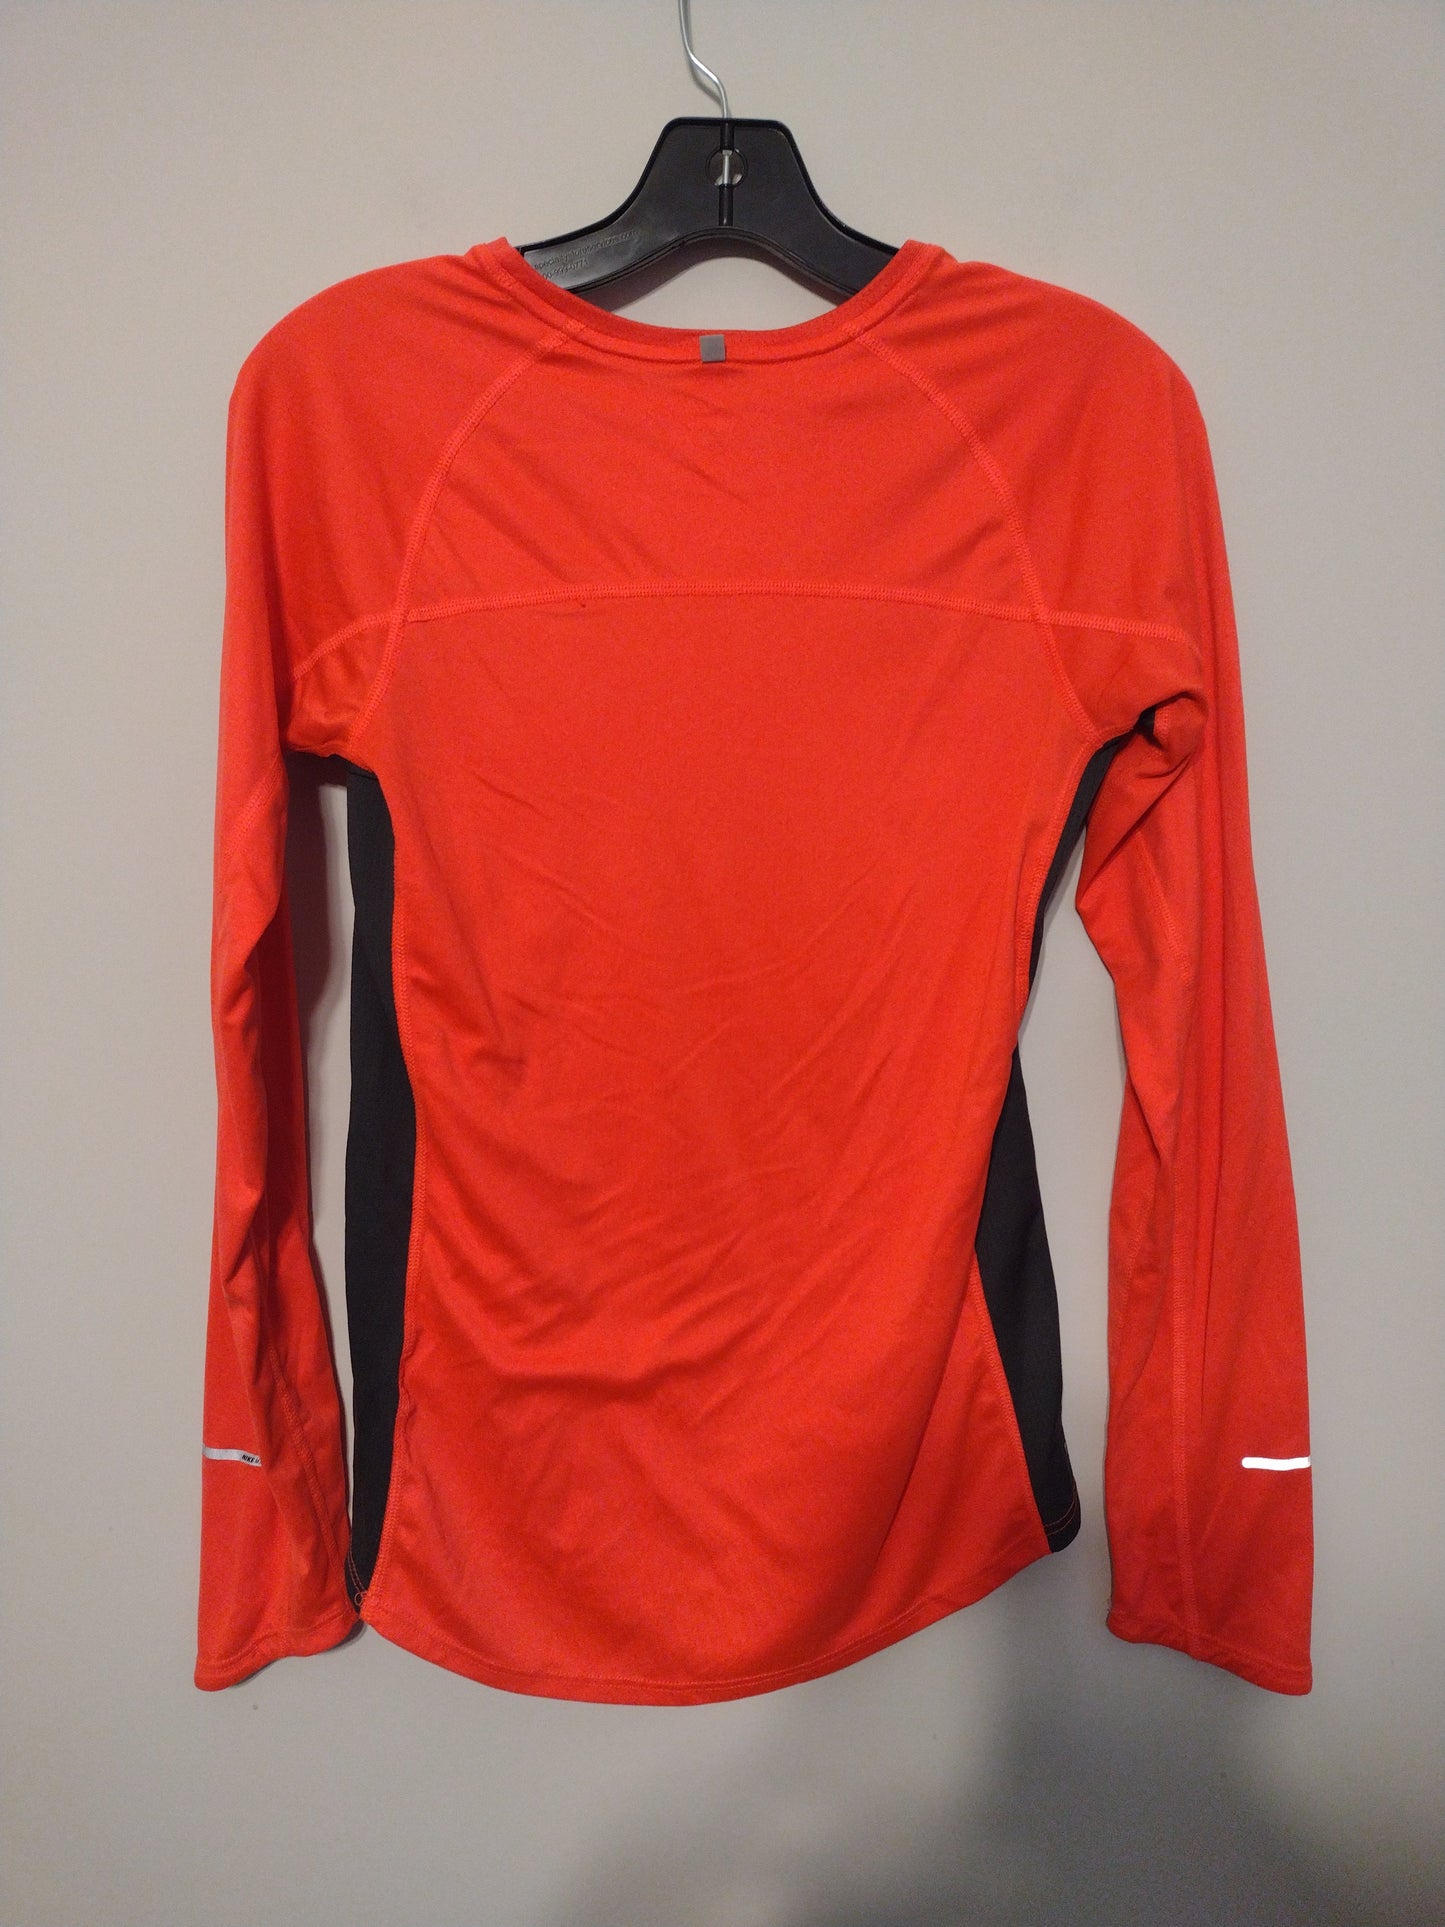 Athletic Top Long Sleeve Crewneck By Nike  Size: S